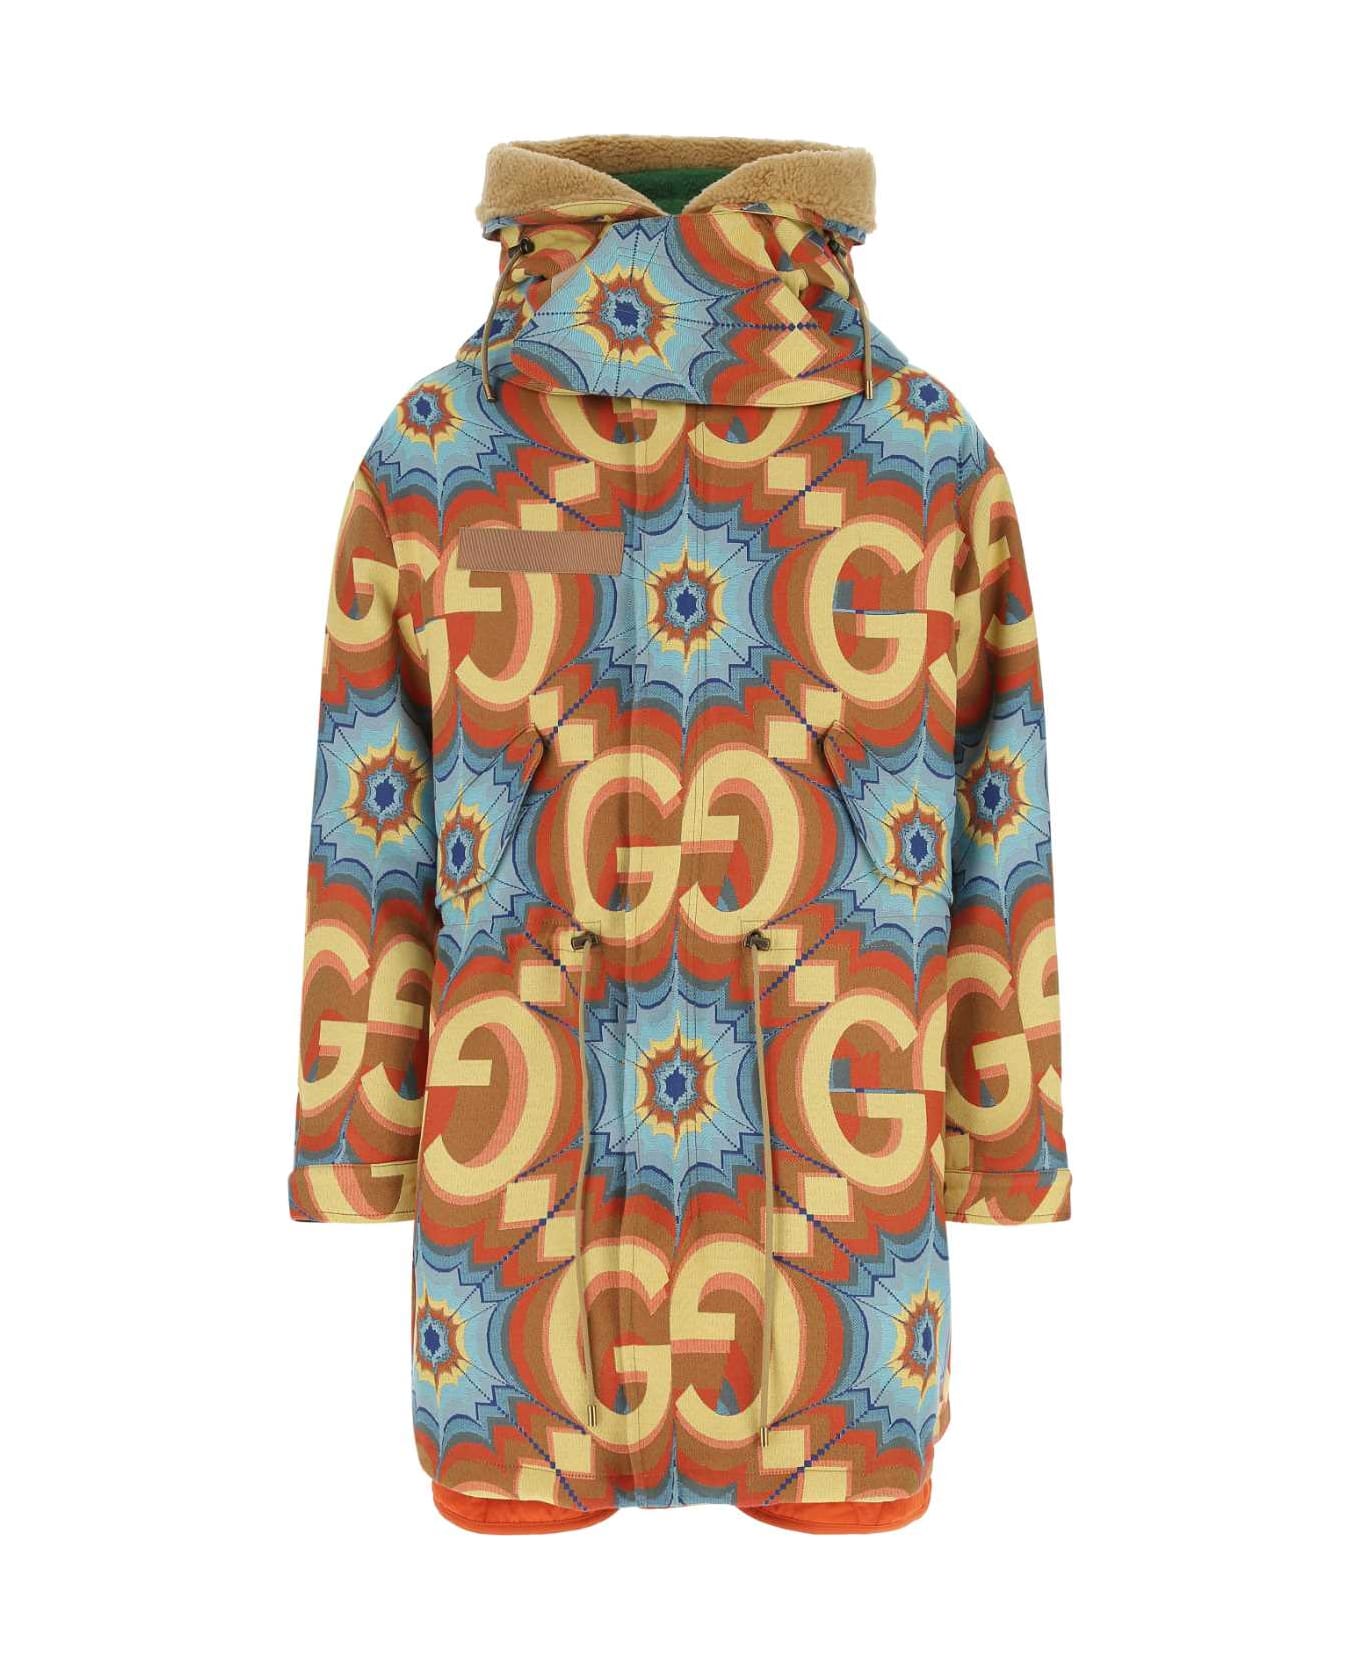 Gucci Embroidered Polyester Blend Parka - 7187